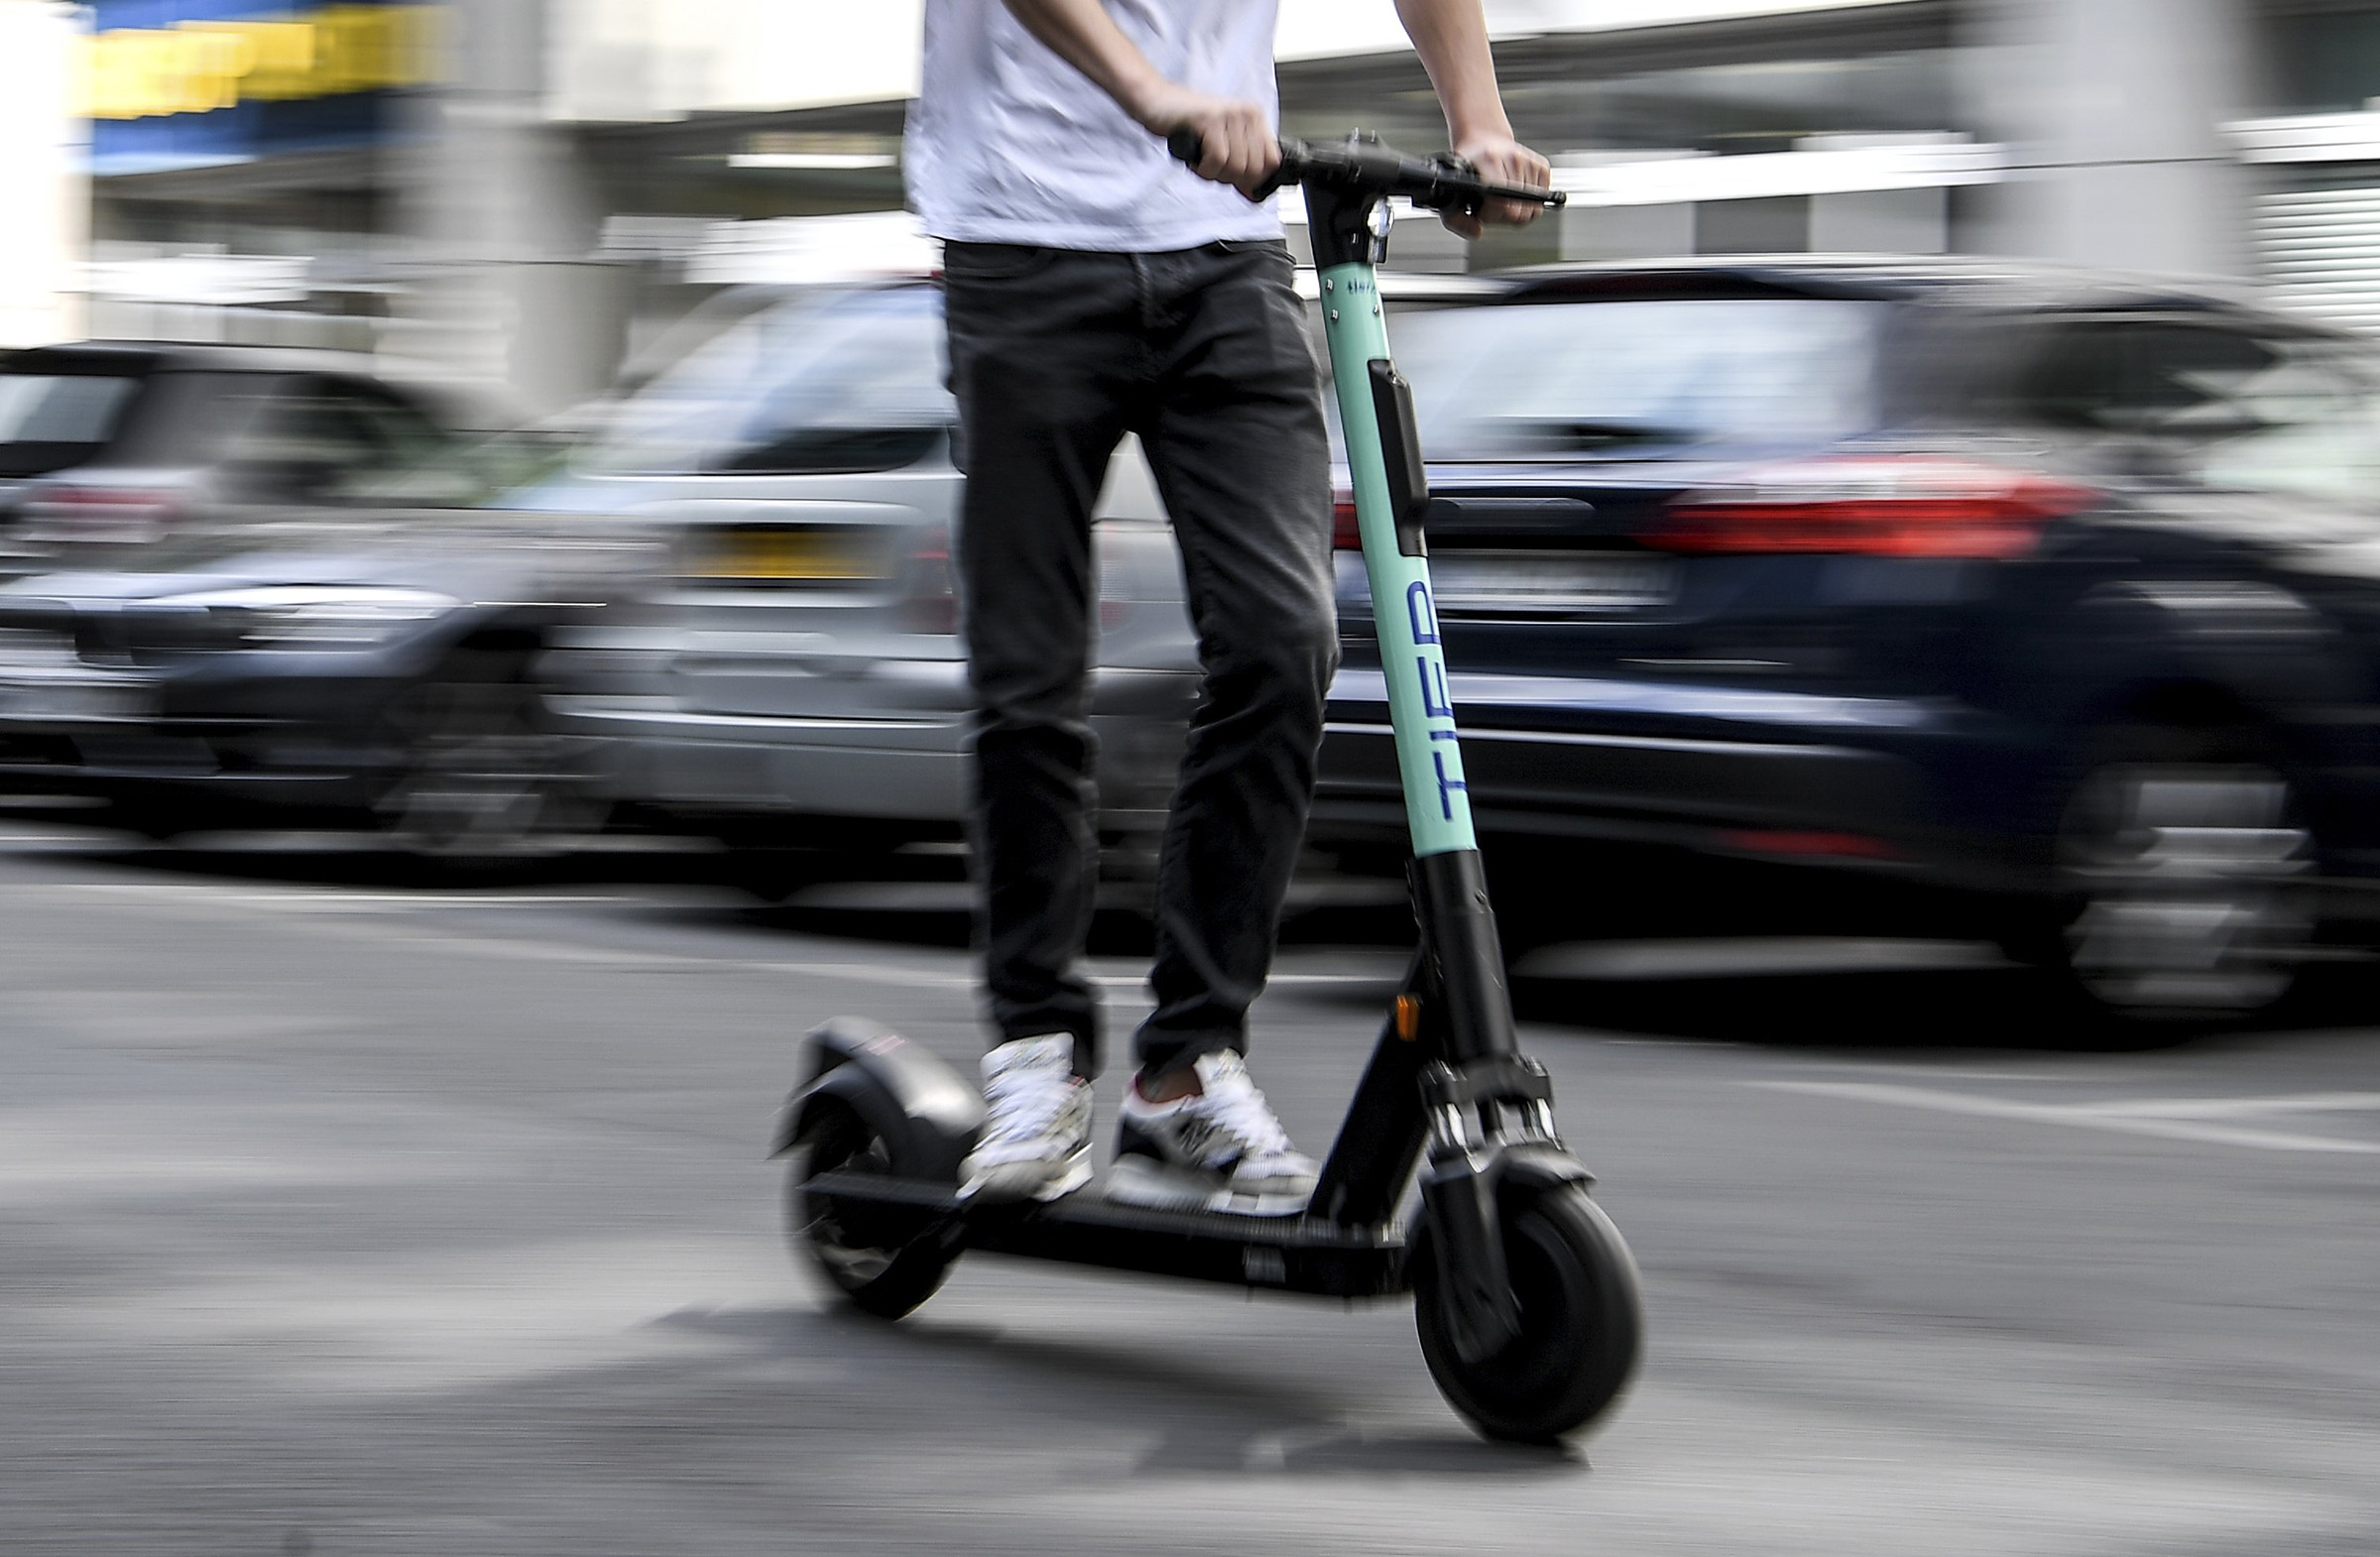 A man drives an electric pedal scooter from Tier in Berlin, Germany. (Britta Pedersen—picture-alliance/dpa/AP)